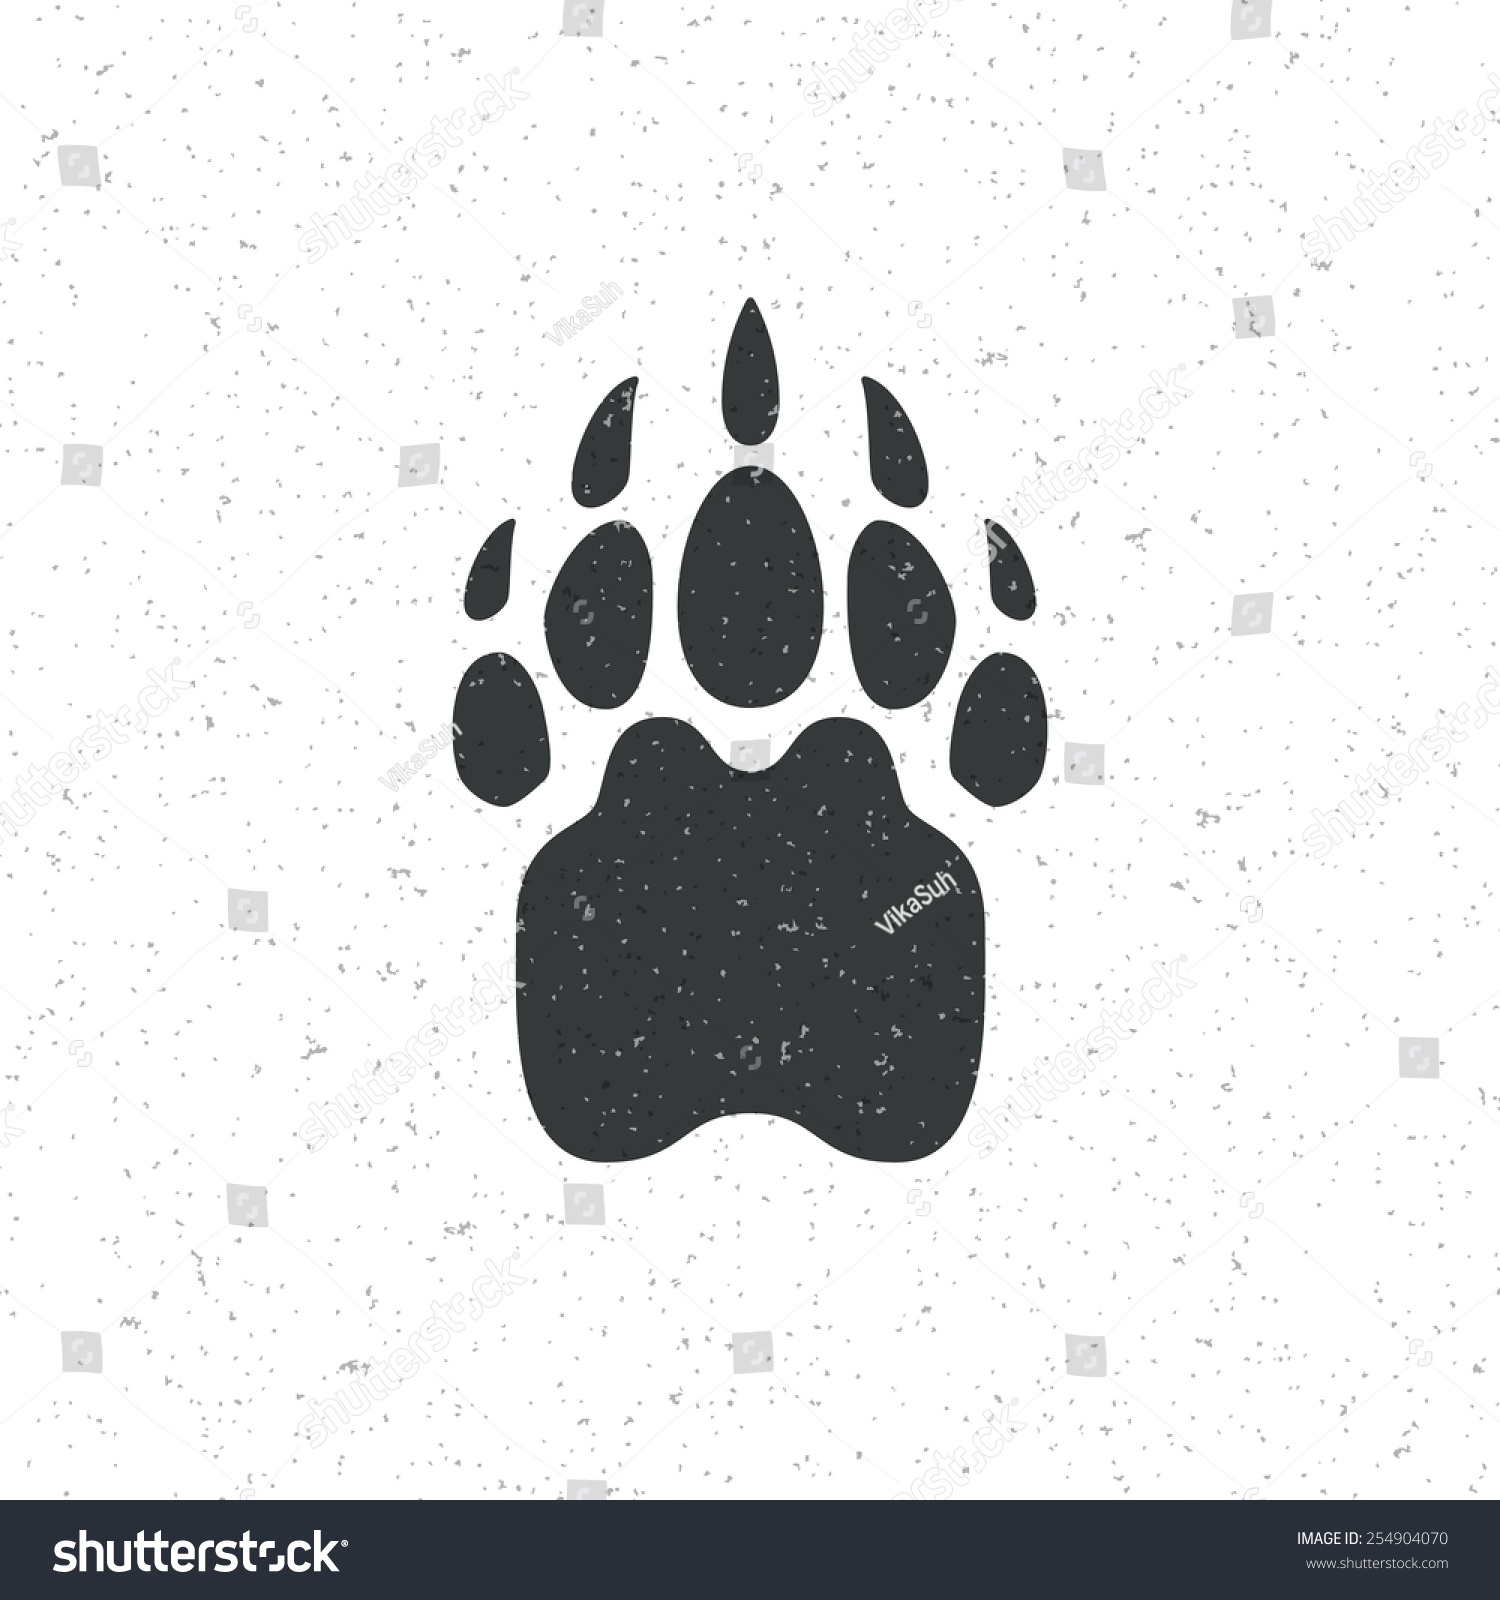 SVG of Vintage bear paw mammal symbol. Can be used for T-shirts print, labels, badges, stickers, logotopypes vector illustration. svg